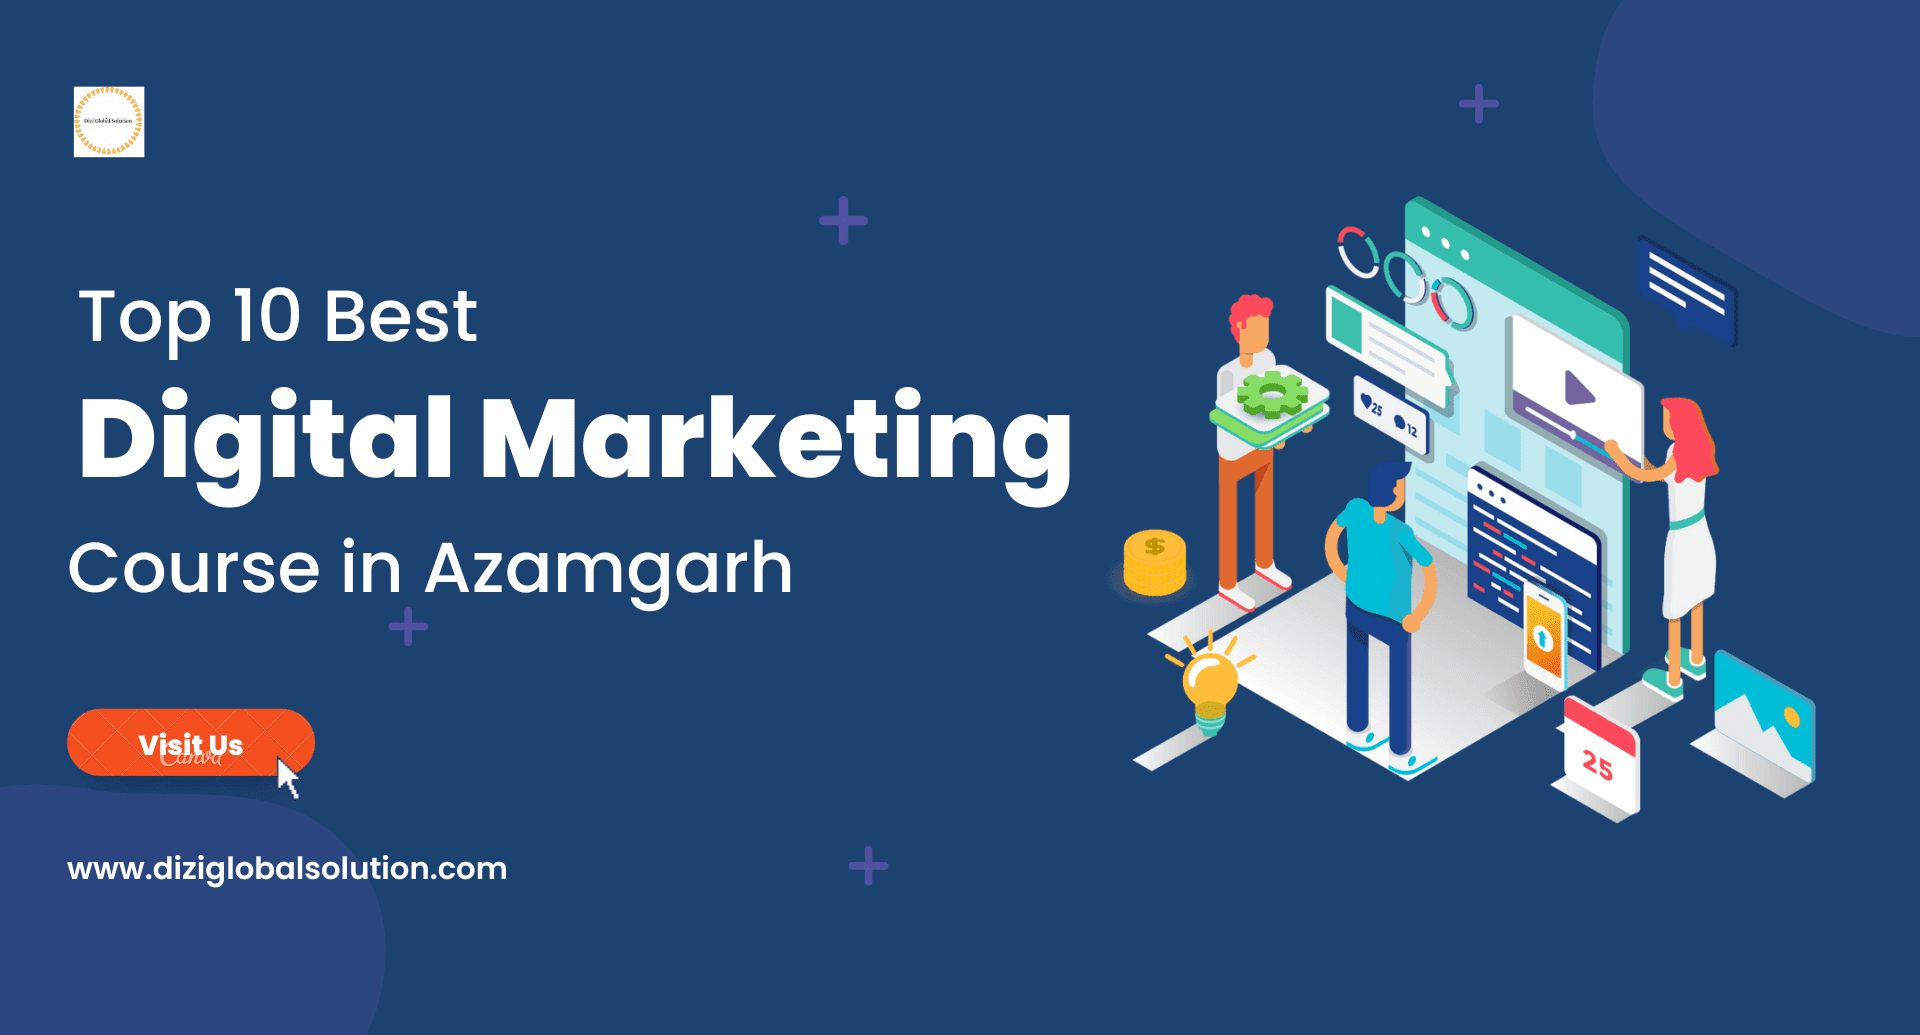 6 Best Digital Marketing Courses in Azamgarh To Boost Your Career